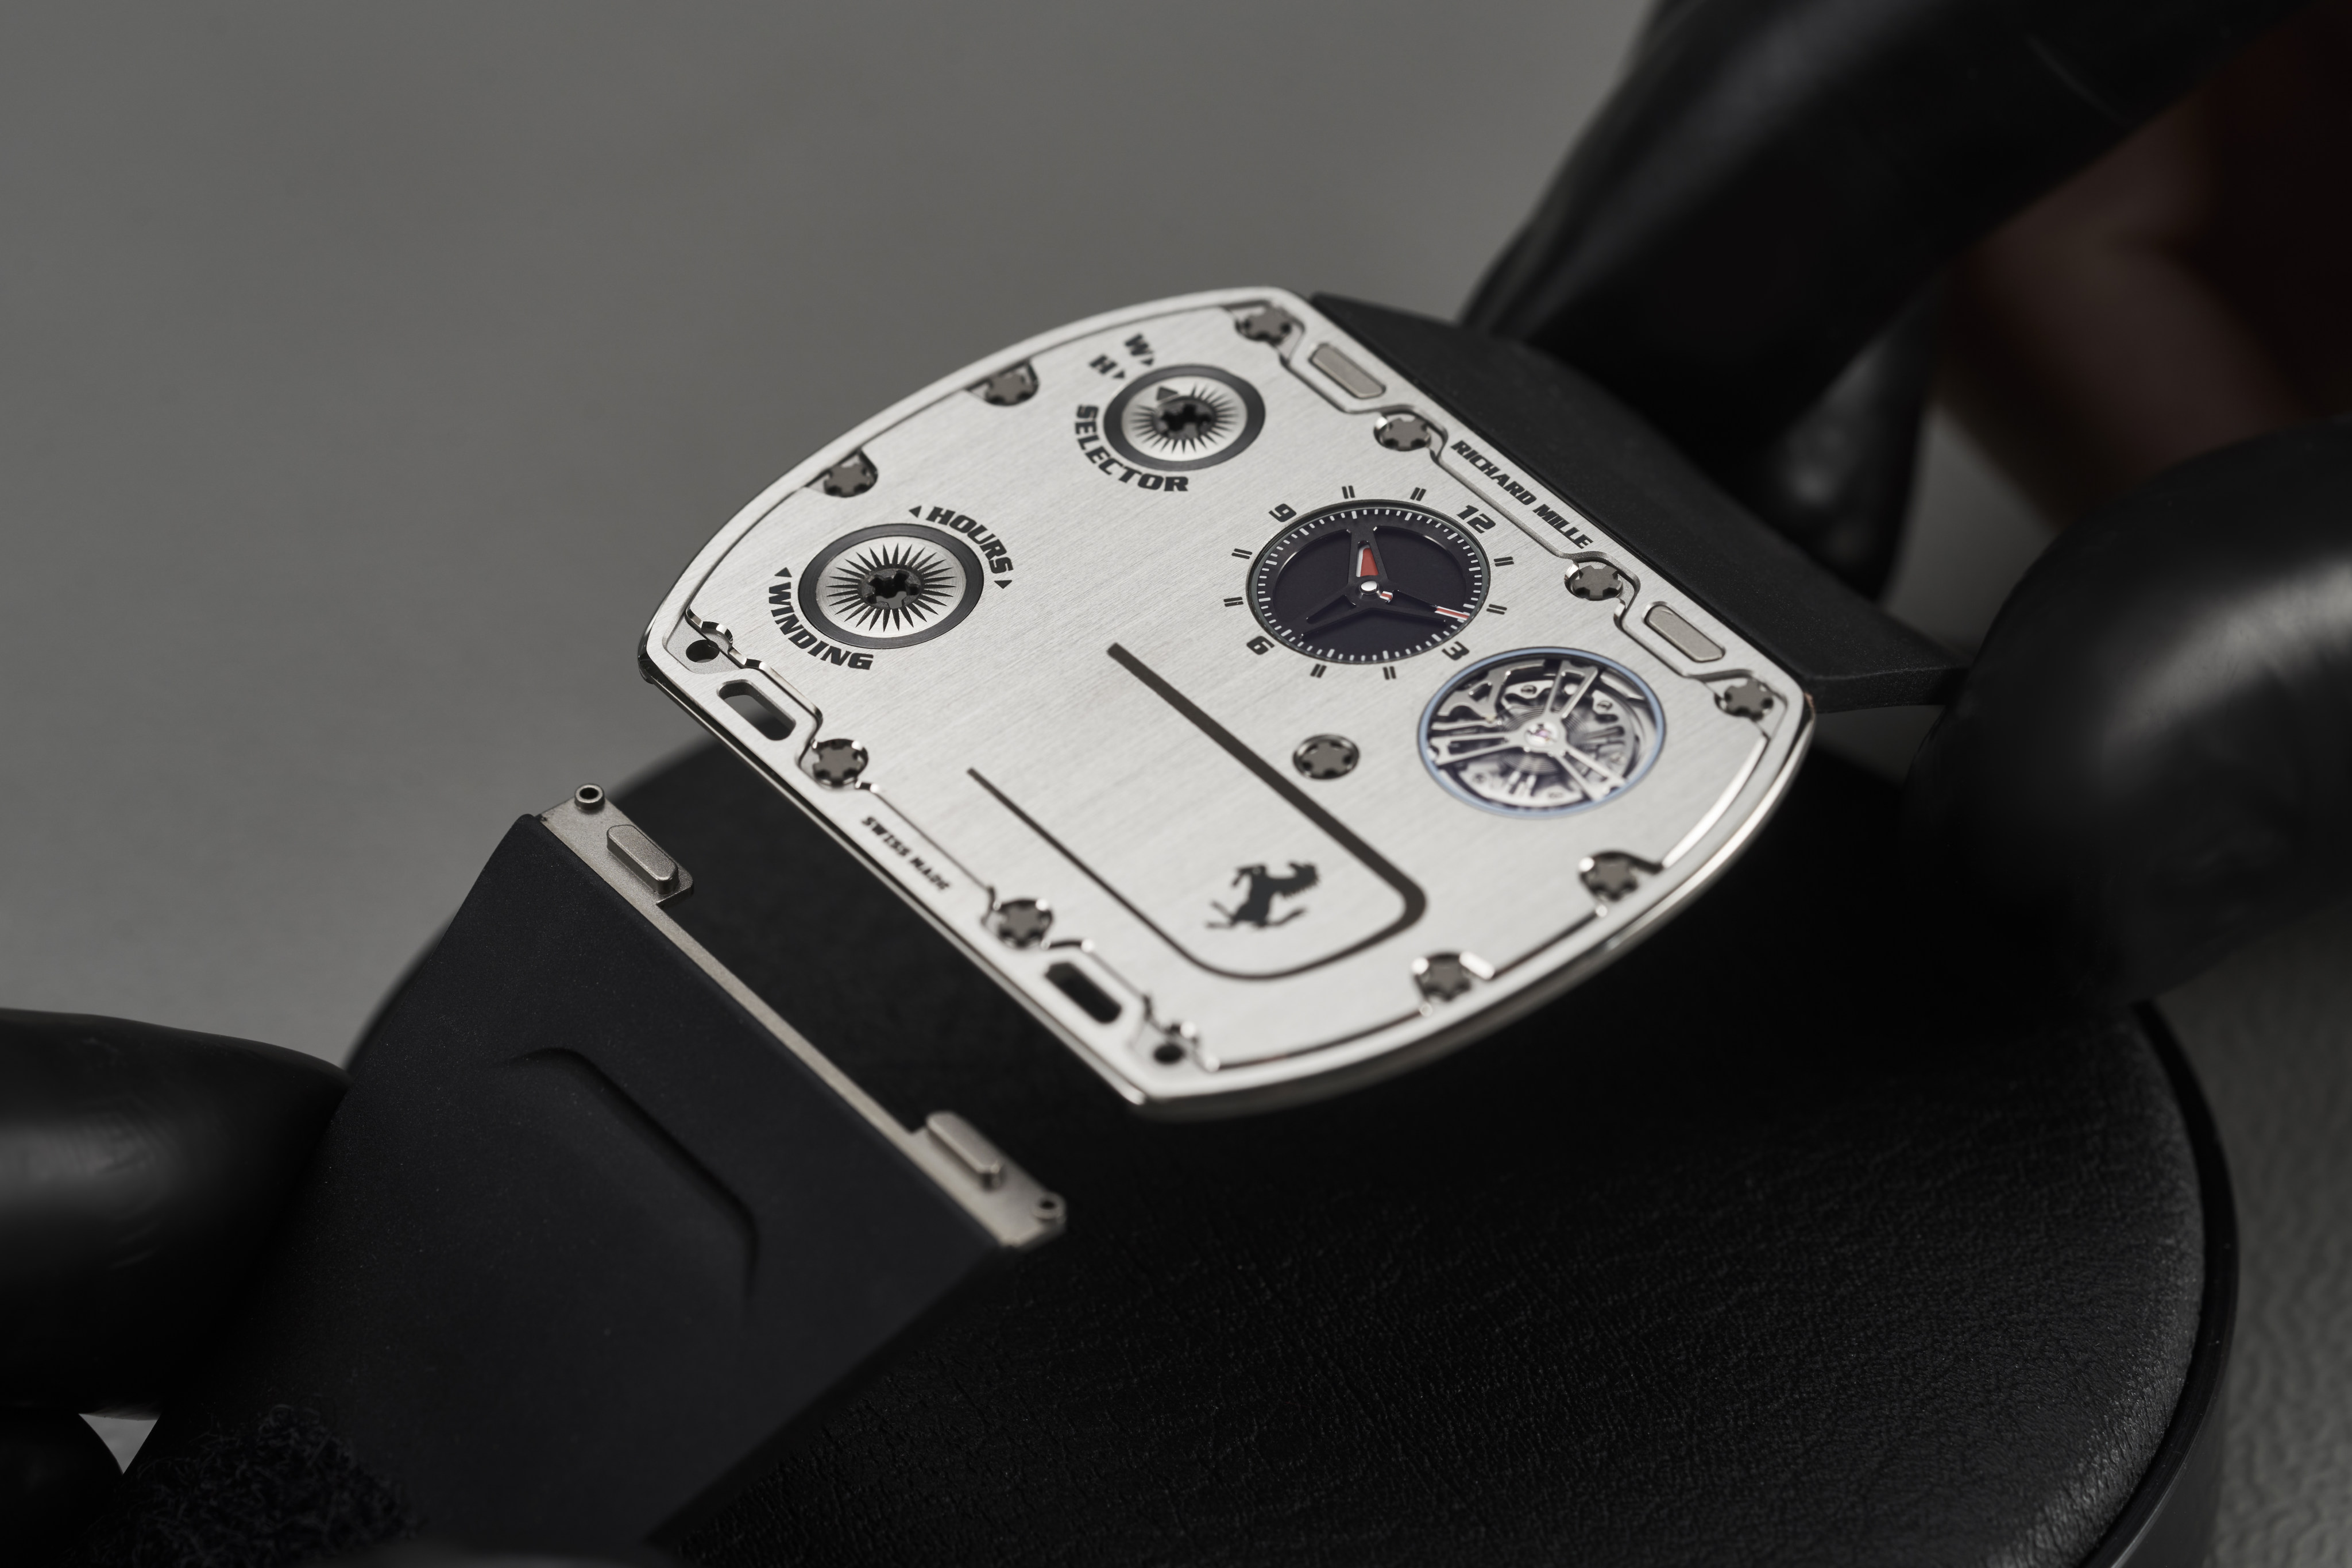 The Richard Mille UP-01 Ferrari breaks new ground in design and manufacture. Photo: Handout             